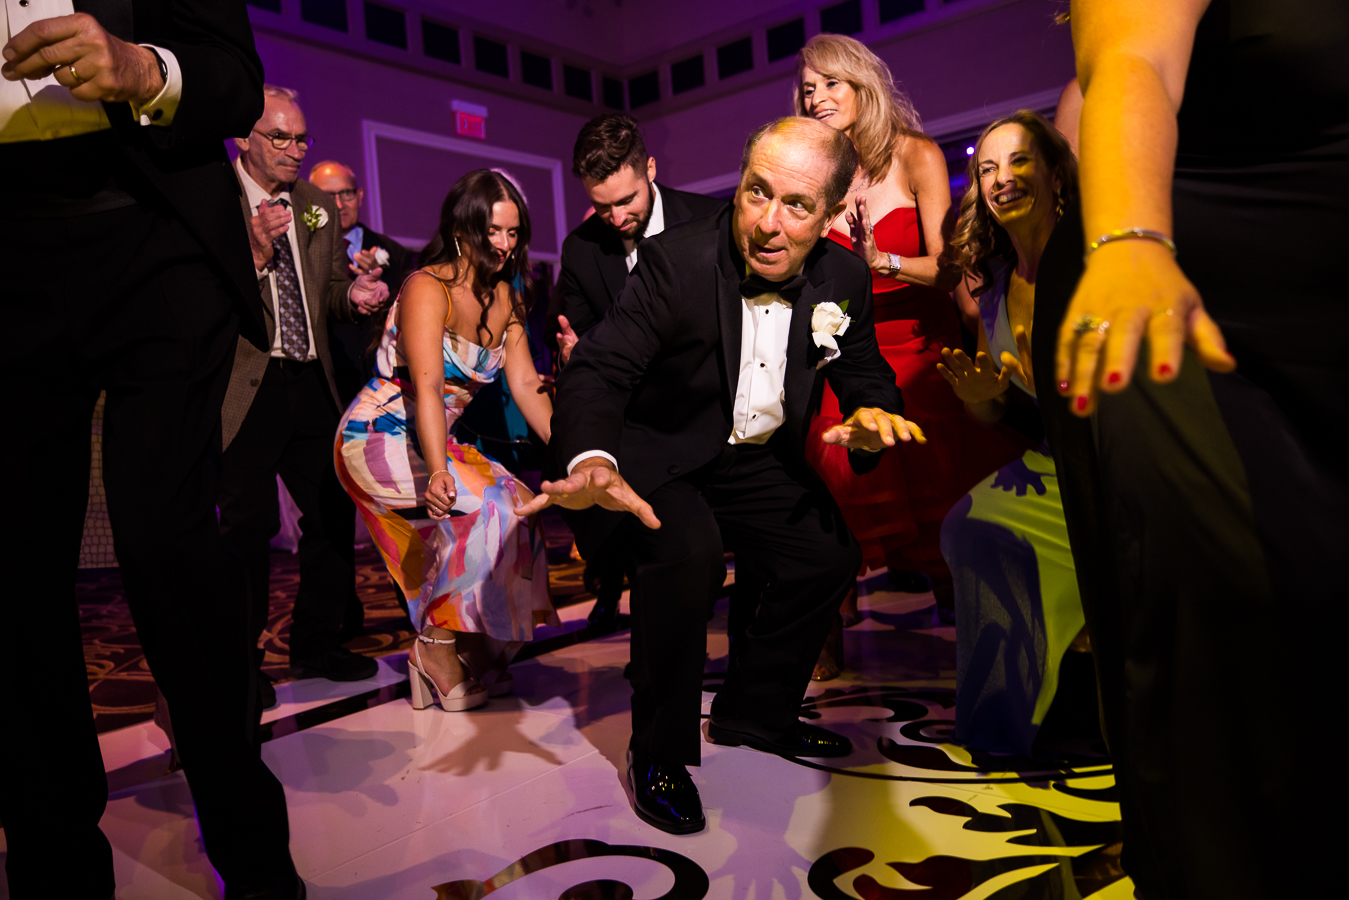 nj wedding photographer, lisa rhinehart, captures wedding guests getting low as they dance on the gold monogramed dance floor during this palace at somerset park wedding reception 